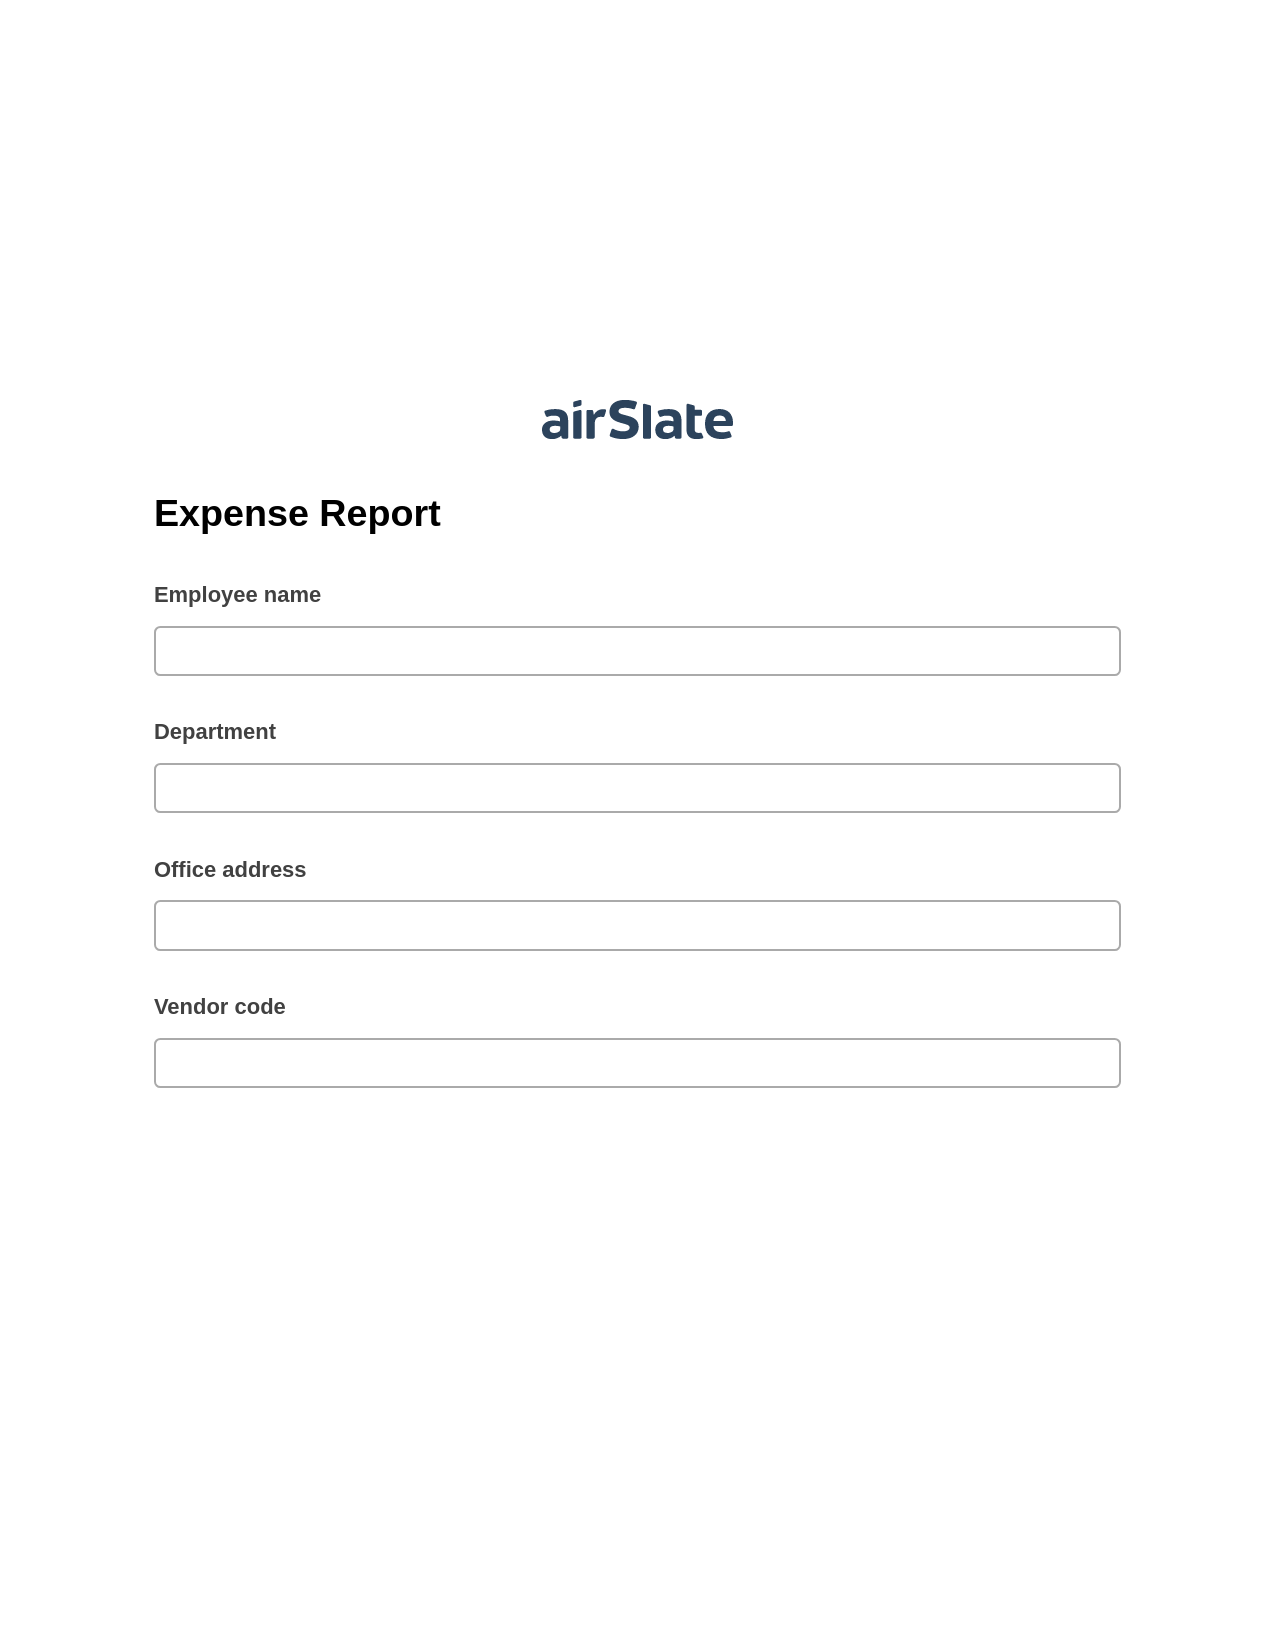 Expense Report Pre-fill Slate from MS Dynamics 365 Records Bot, Pre-fill with Custom Data Bot, Export to Smartsheet